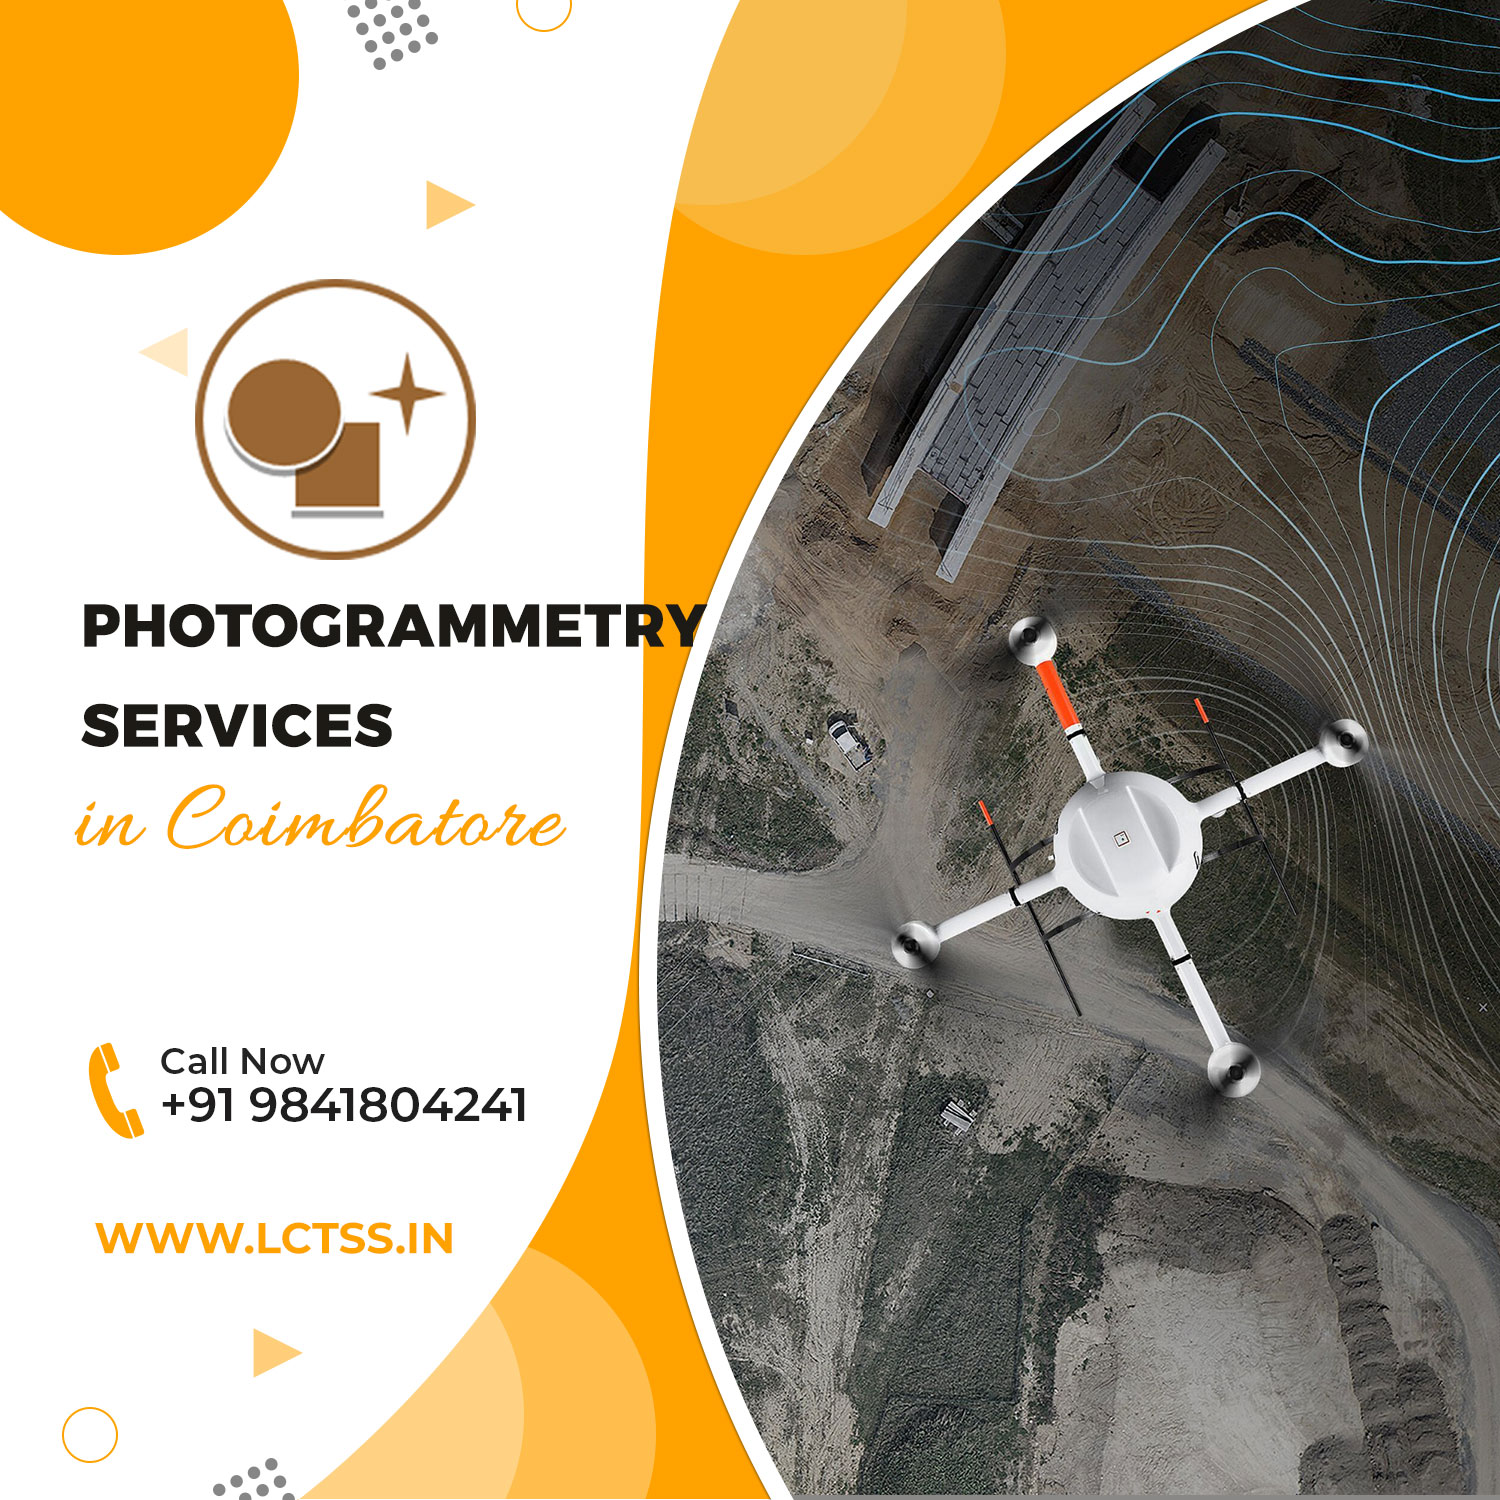 Photogrammetry Services in Coimbatore